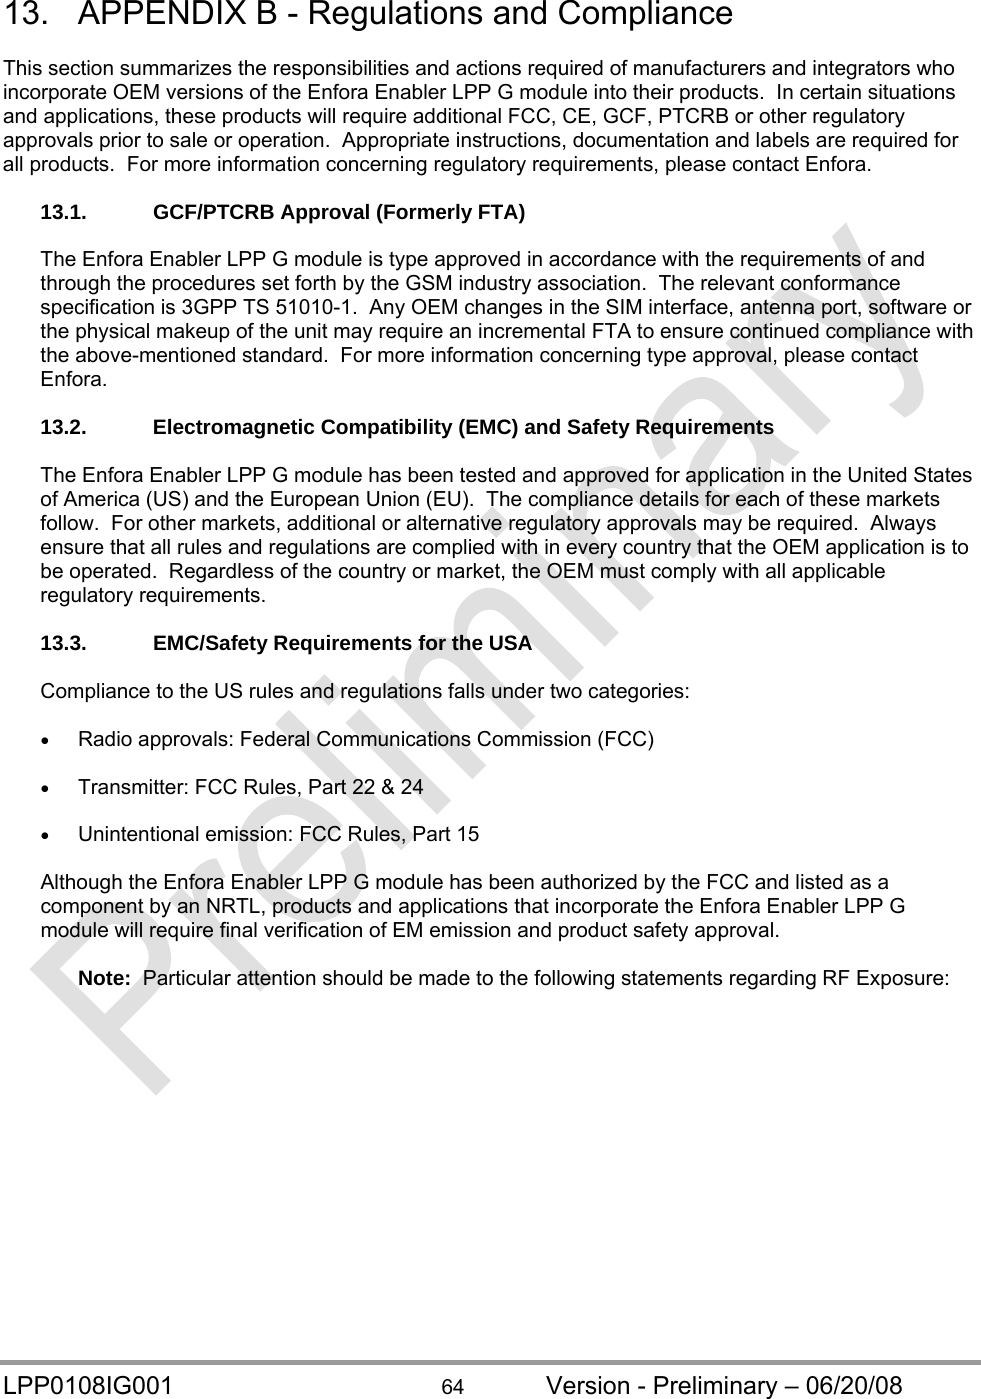  LPP0108IG001  64  Version - Preliminary – 06/20/08 13.  APPENDIX B - Regulations and Compliance  This section summarizes the responsibilities and actions required of manufacturers and integrators who incorporate OEM versions of the Enfora Enabler LPP G module into their products.  In certain situations and applications, these products will require additional FCC, CE, GCF, PTCRB or other regulatory approvals prior to sale or operation.  Appropriate instructions, documentation and labels are required for all products.  For more information concerning regulatory requirements, please contact Enfora.  13.1.  GCF/PTCRB Approval (Formerly FTA)  The Enfora Enabler LPP G module is type approved in accordance with the requirements of and through the procedures set forth by the GSM industry association.  The relevant conformance specification is 3GPP TS 51010-1.  Any OEM changes in the SIM interface, antenna port, software or the physical makeup of the unit may require an incremental FTA to ensure continued compliance with the above-mentioned standard.  For more information concerning type approval, please contact Enfora.  13.2. Electromagnetic Compatibility (EMC) and Safety Requirements  The Enfora Enabler LPP G module has been tested and approved for application in the United States of America (US) and the European Union (EU).  The compliance details for each of these markets follow.  For other markets, additional or alternative regulatory approvals may be required.  Always ensure that all rules and regulations are complied with in every country that the OEM application is to be operated.  Regardless of the country or market, the OEM must comply with all applicable regulatory requirements.  13.3.  EMC/Safety Requirements for the USA  Compliance to the US rules and regulations falls under two categories:   Radio approvals: Federal Communications Commission (FCC)   Transmitter: FCC Rules, Part 22 &amp; 24   Unintentional emission: FCC Rules, Part 15  Although the Enfora Enabler LPP G module has been authorized by the FCC and listed as a component by an NRTL, products and applications that incorporate the Enfora Enabler LPP G module will require final verification of EM emission and product safety approval.  Note:  Particular attention should be made to the following statements regarding RF Exposure: 